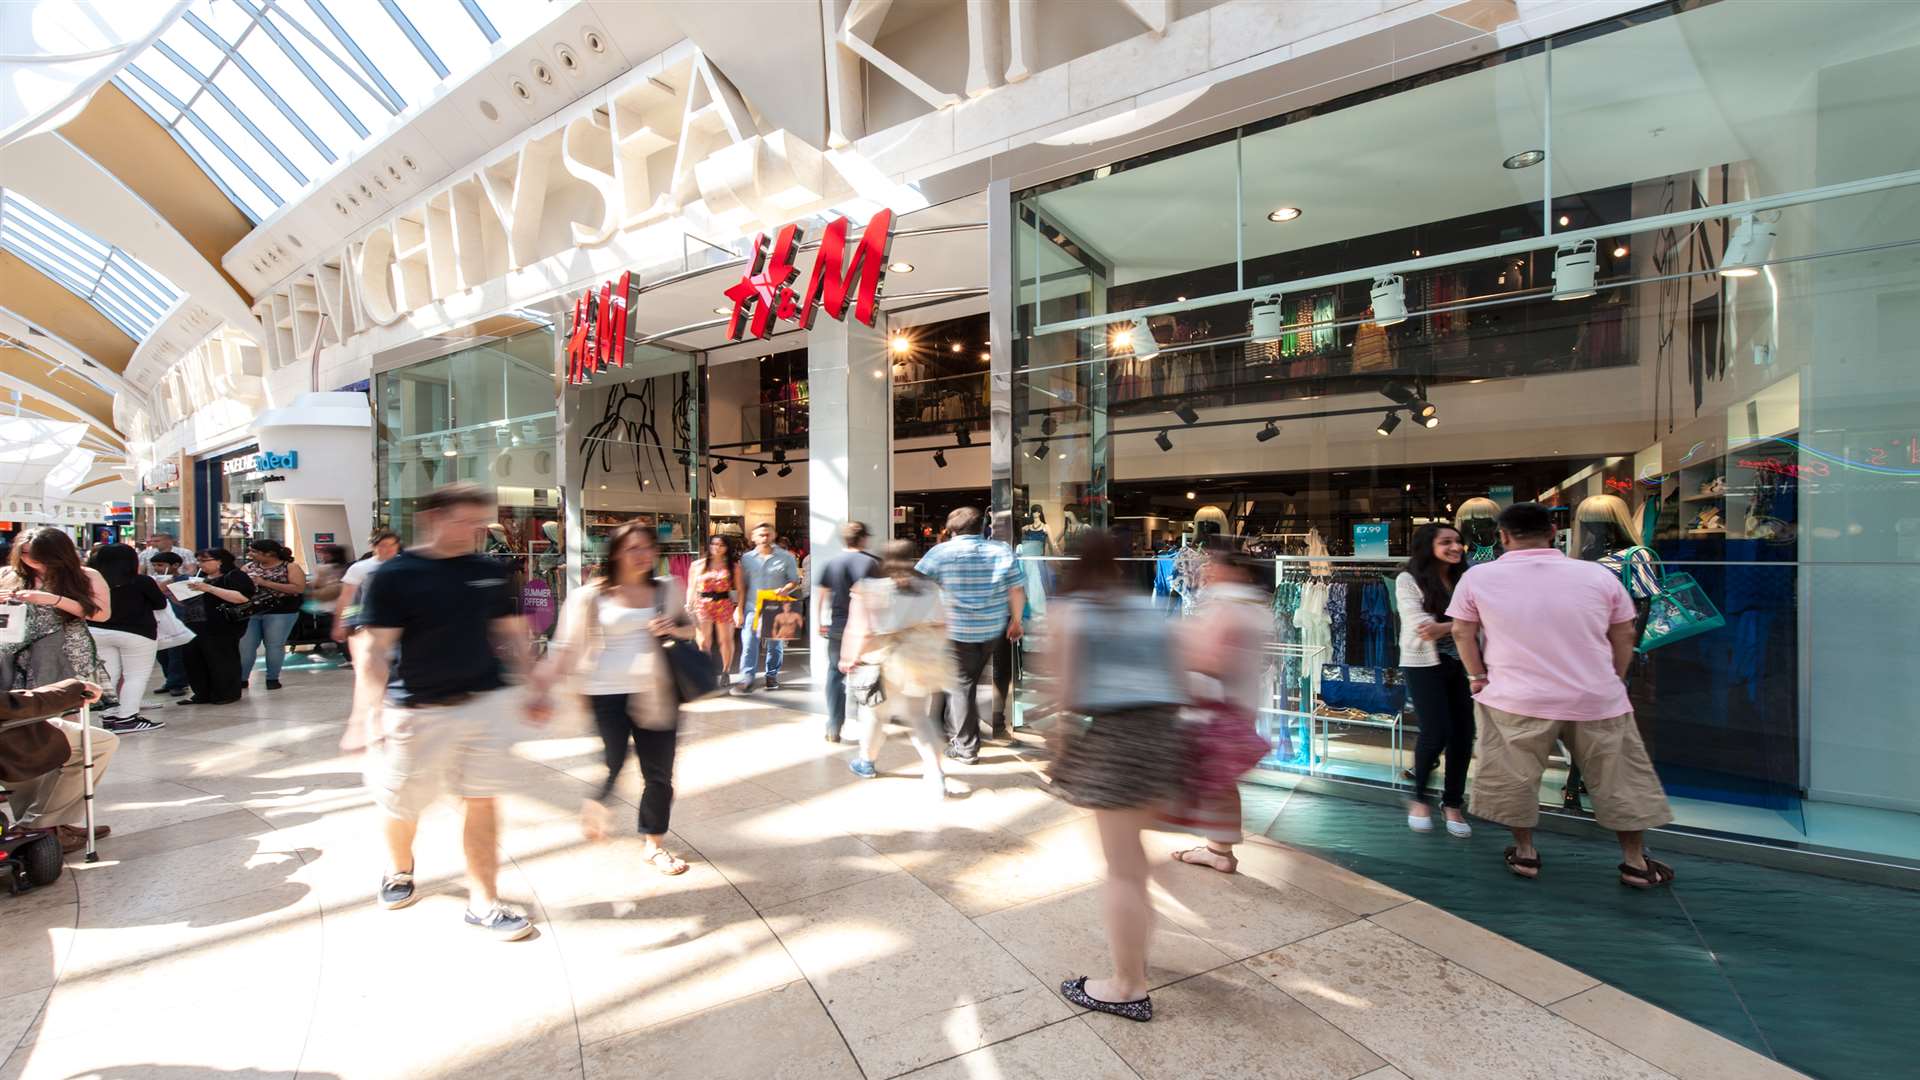 H&M will more than double the size of its current store at Bluewater